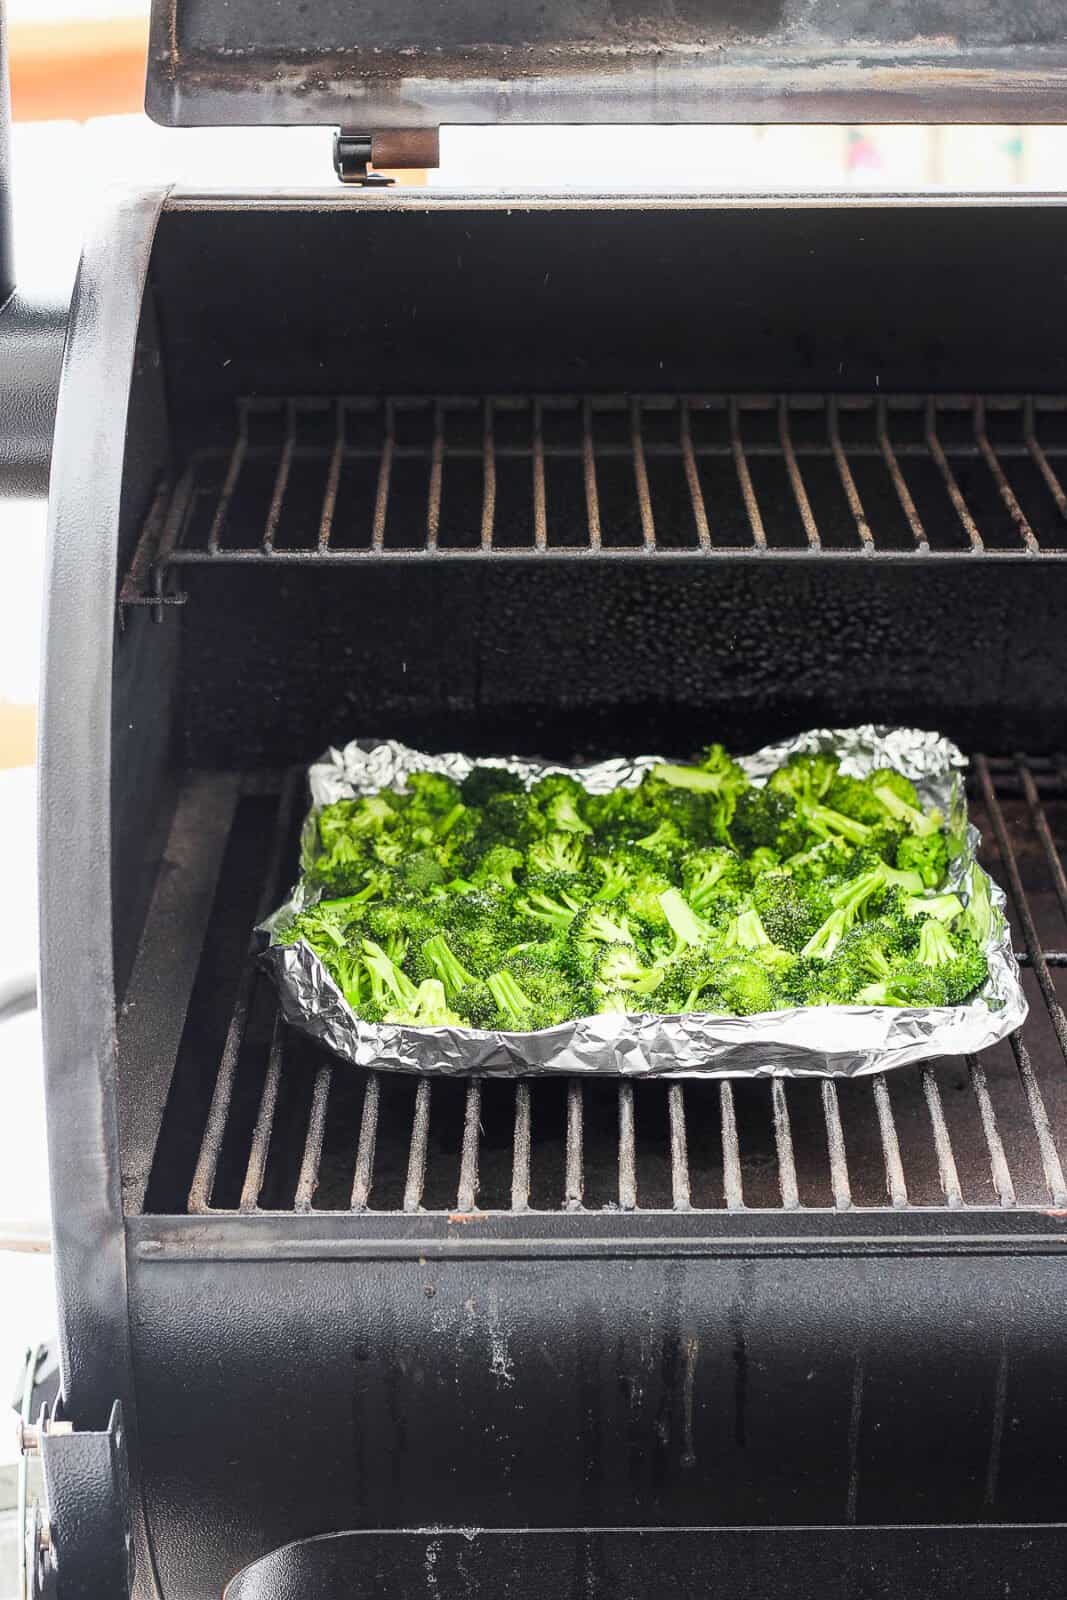 Broccoli in an aluminum foil boat on the smoker.